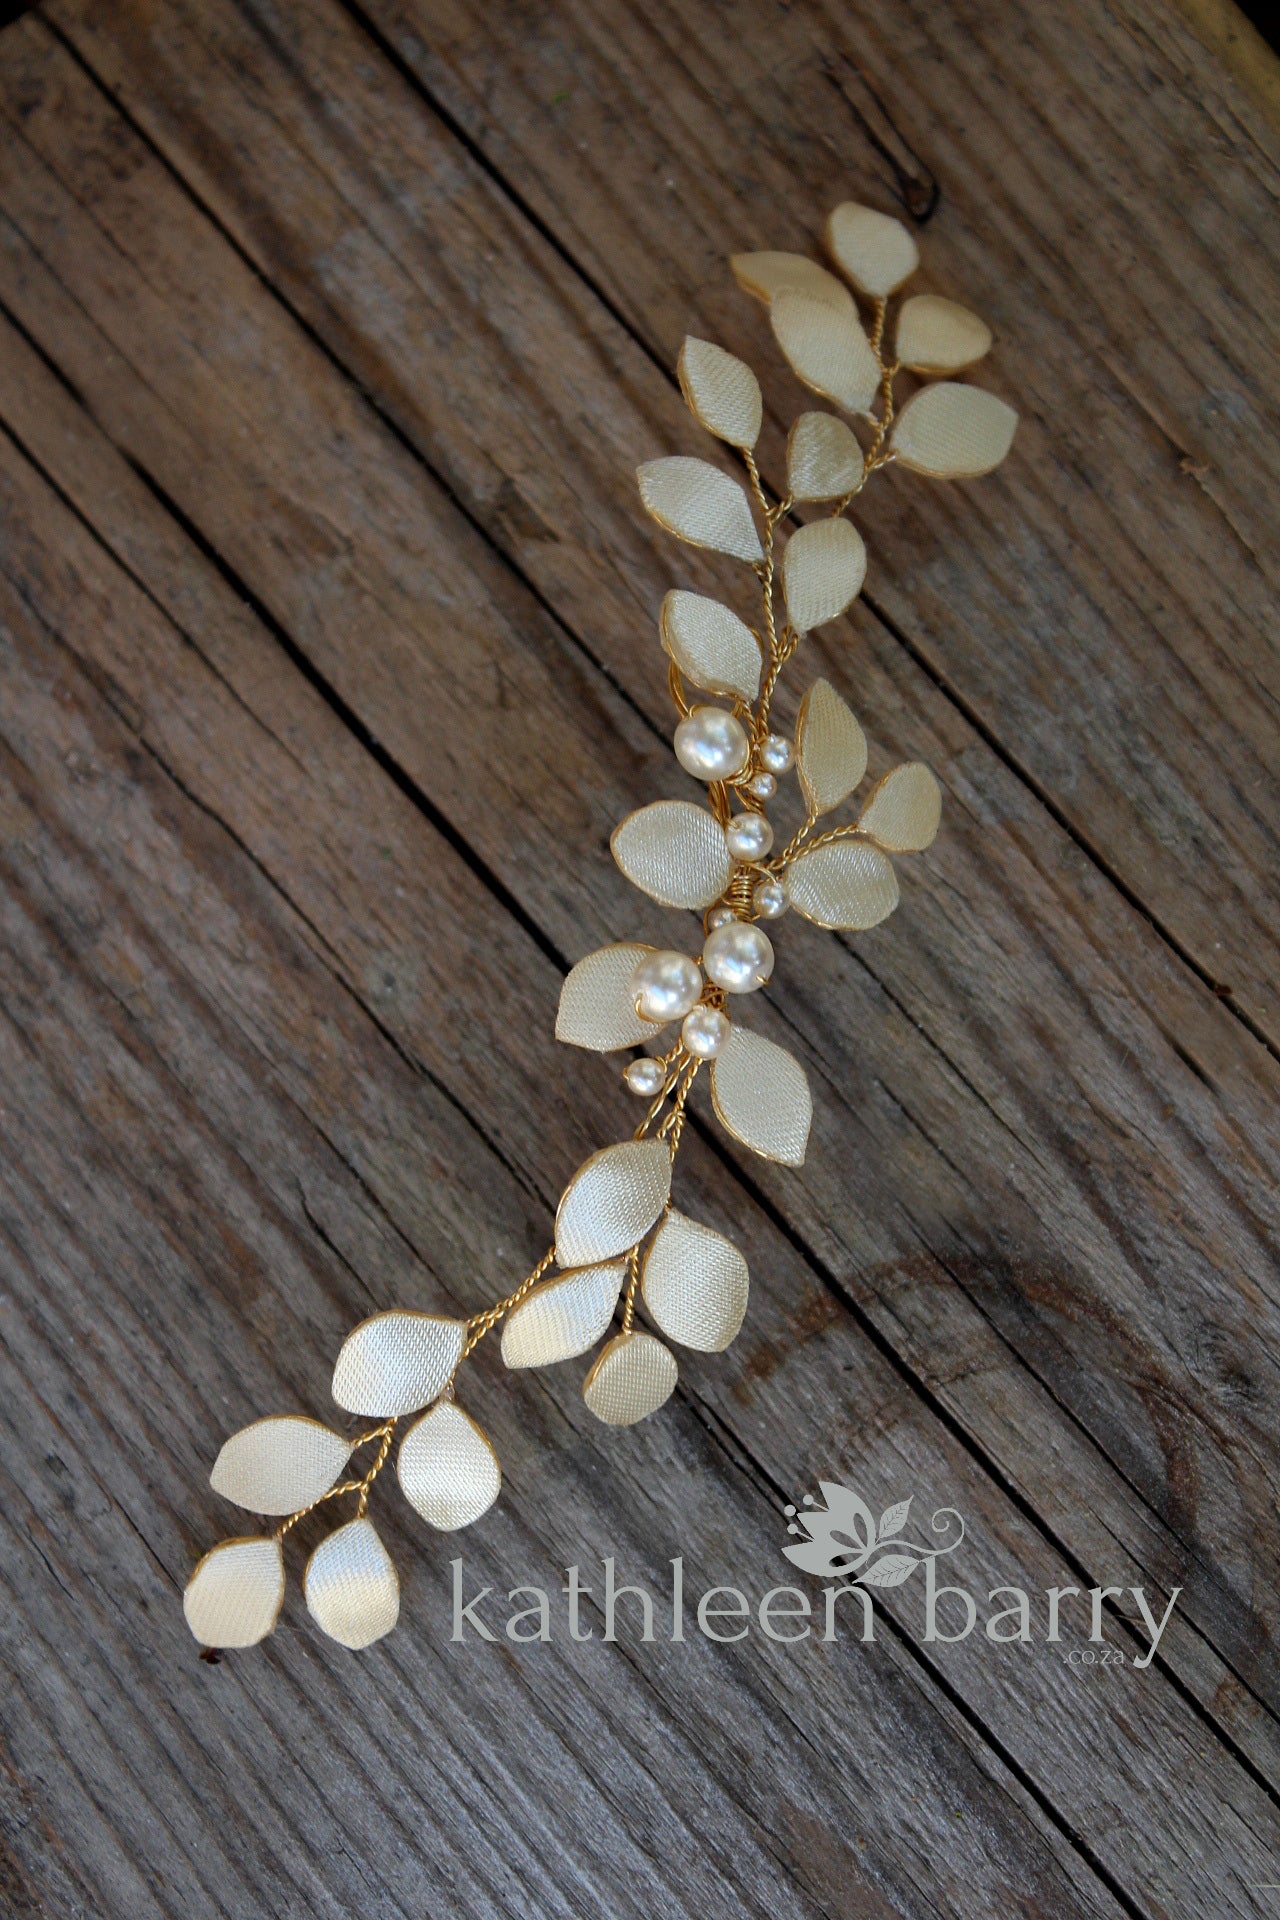 Caralize leaf hairpiece - satin sculpted fabric leaves & pearls - many color options available